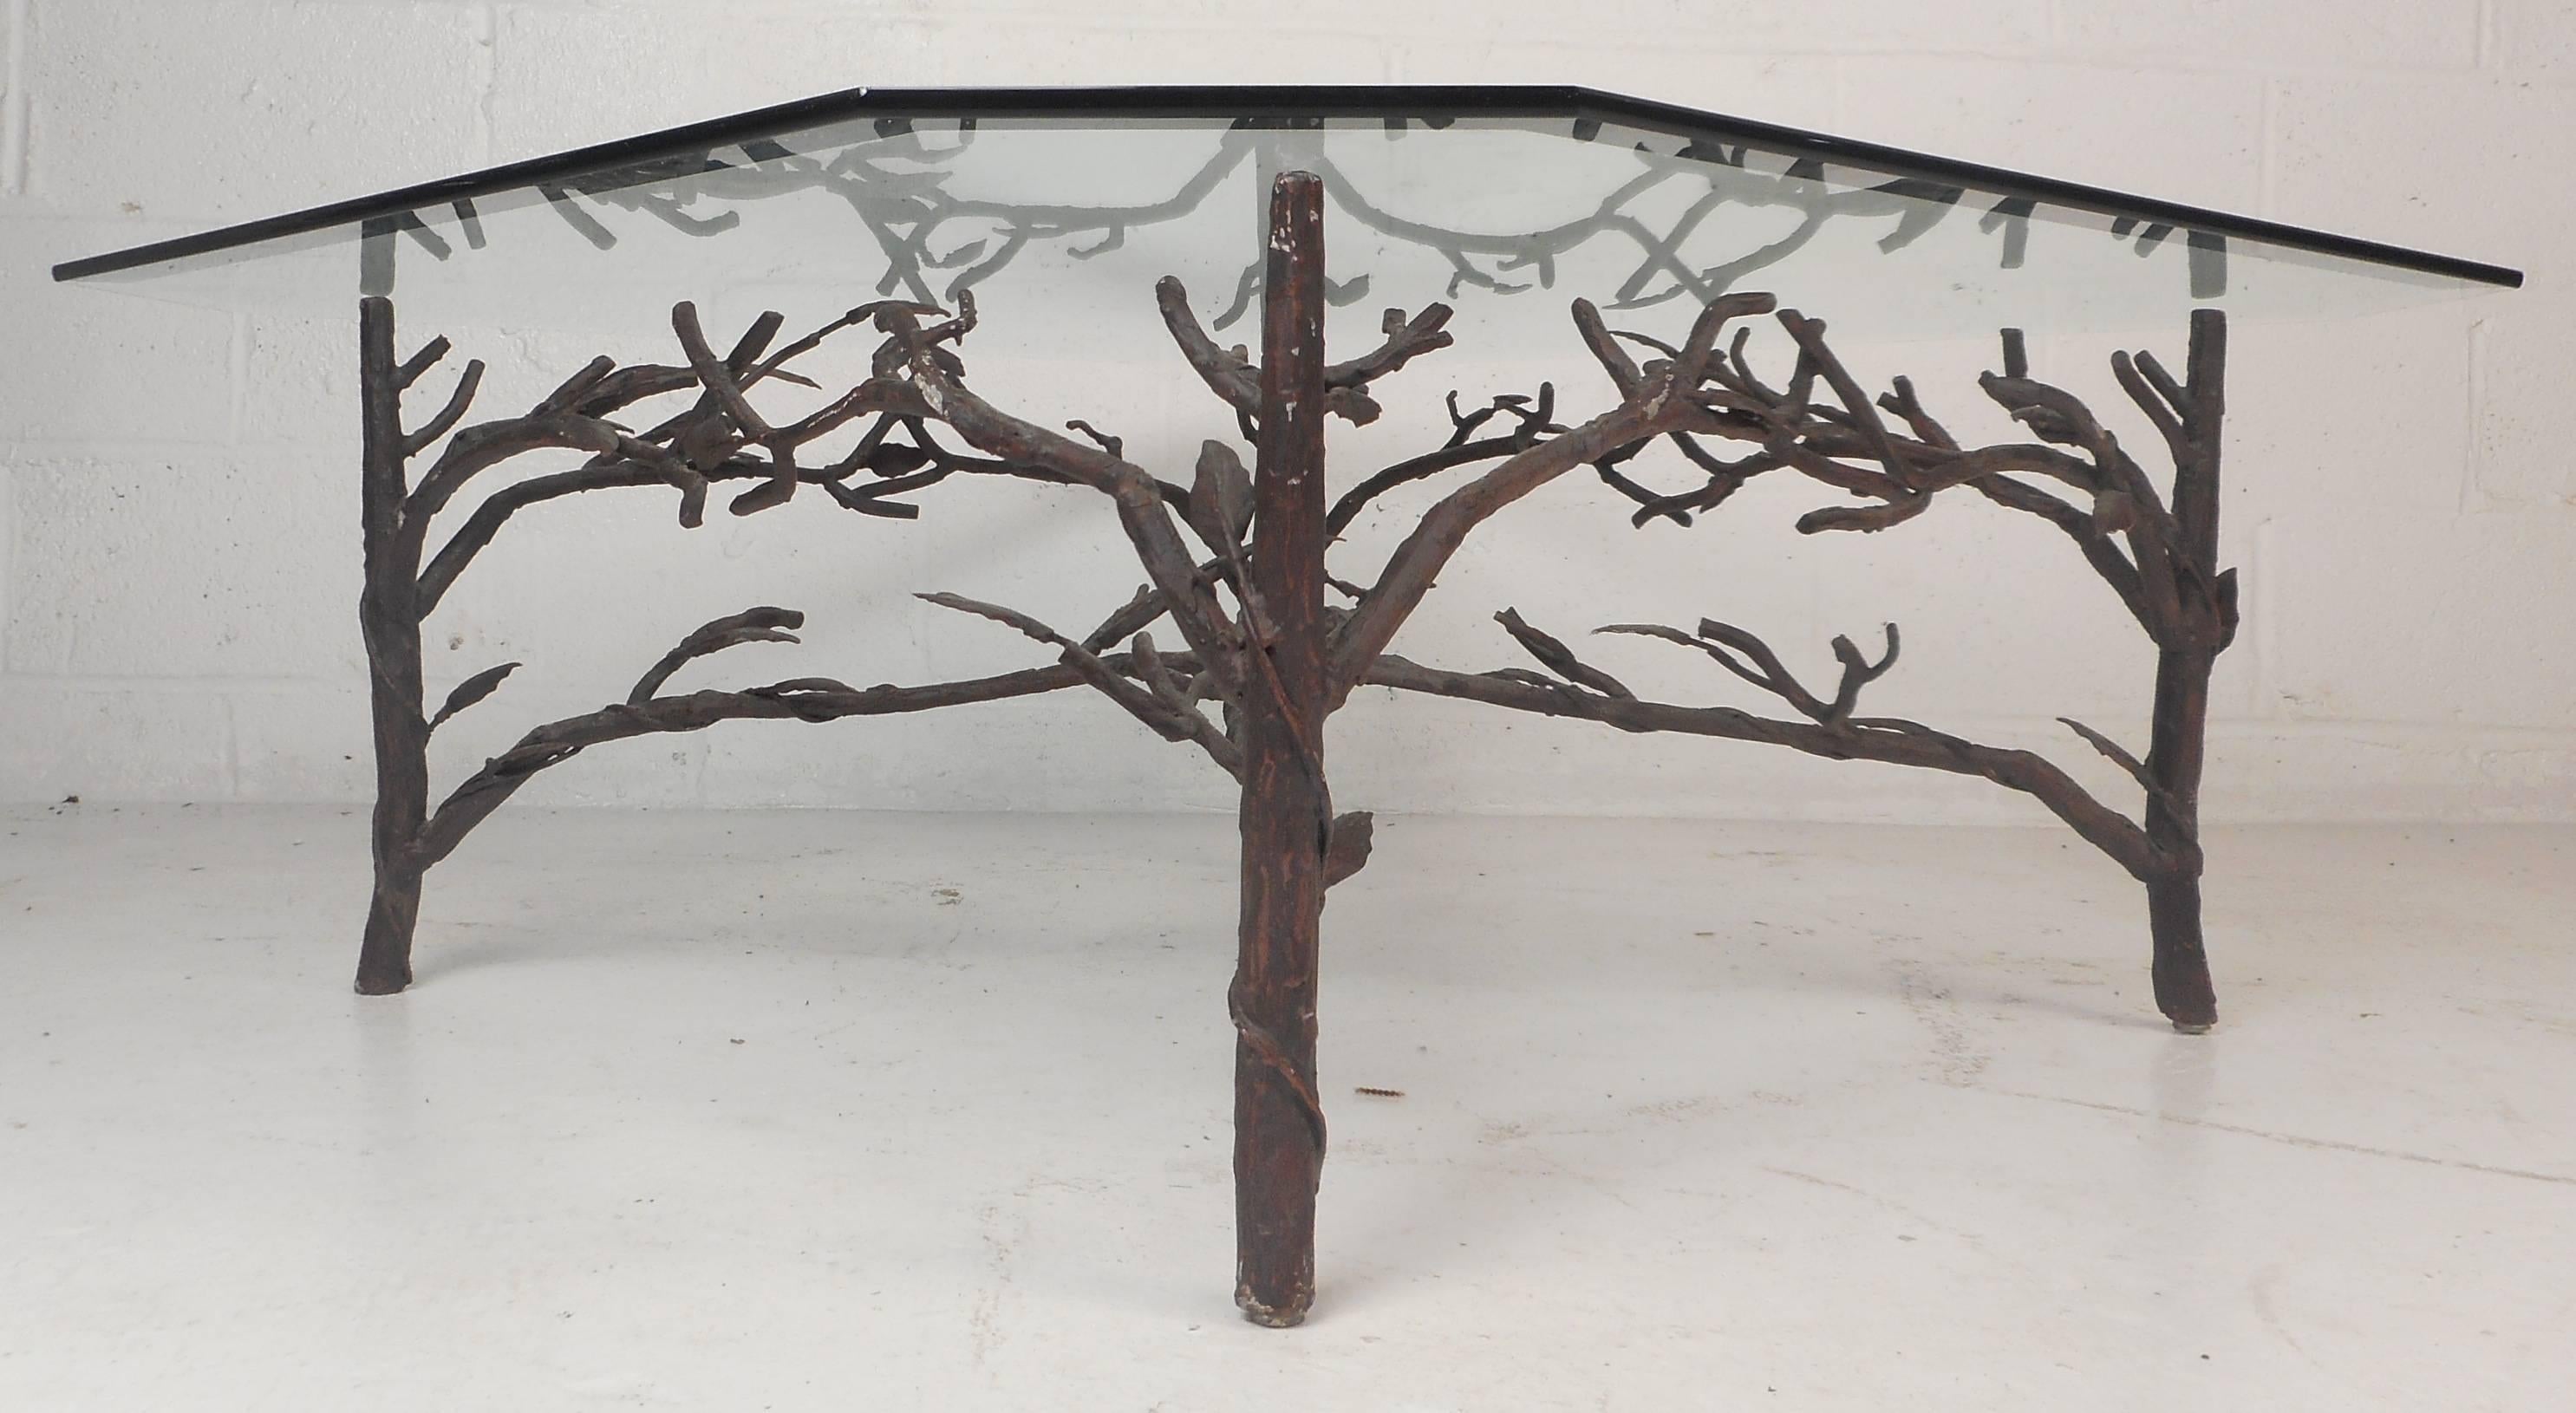 Stunning contemporary modern coffee table features a metal base with a unique tree limb design. The sturdy metal base displays vintage patina and intricate detail. Impressive thick glass with beveled edges and a light green tint sits comfortably on